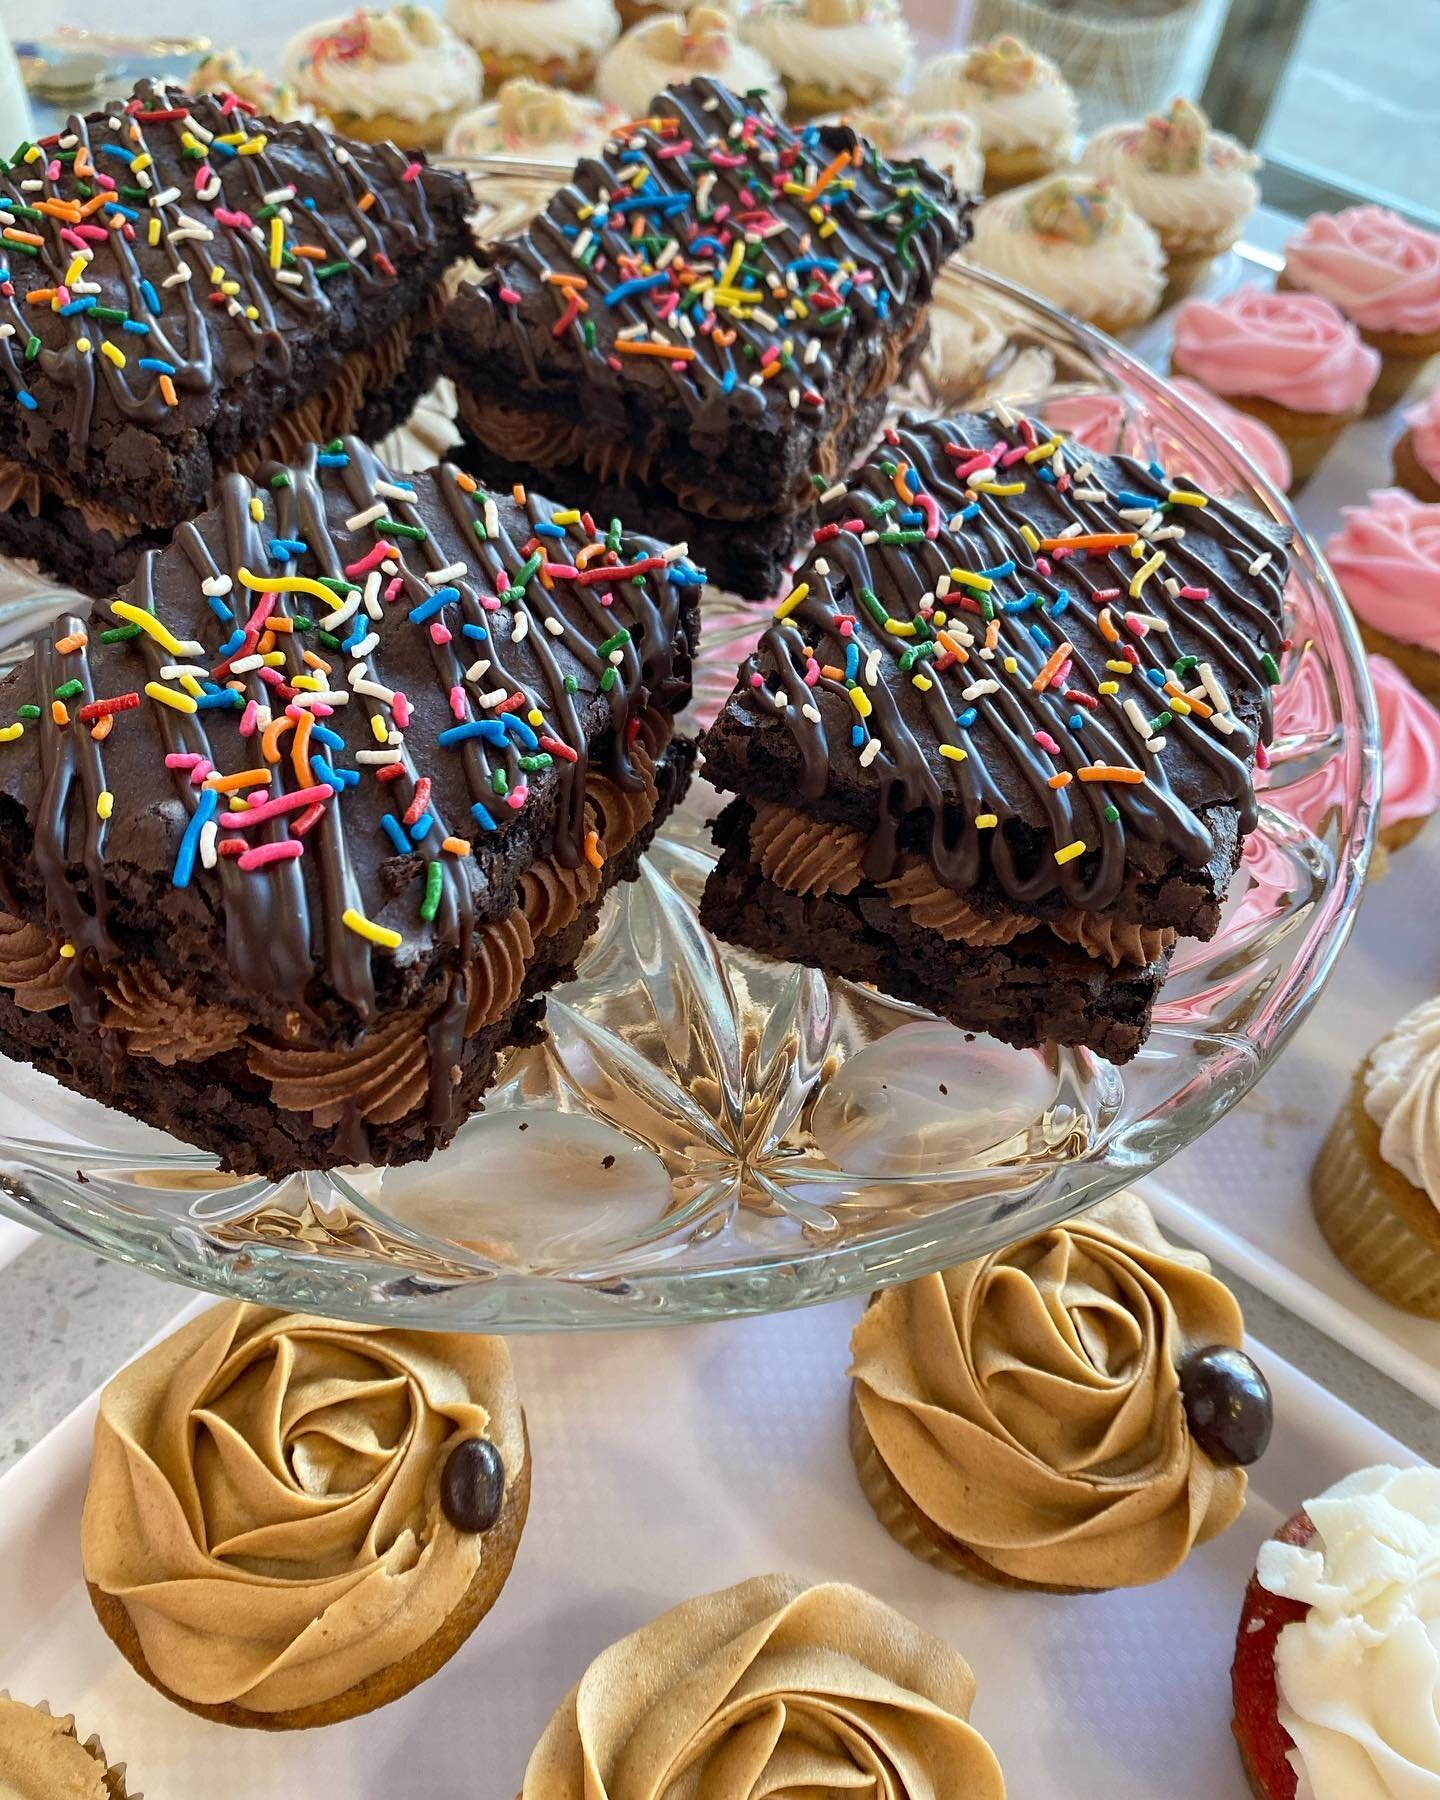 We still have plenty of cupcakes, cutie cakes, layer cakes, coffee cakes, cookie sandwiches, triple chocolate brownies, and DUNKAROOS! We&rsquo;re here until 4 at our new location in the Thunder Centre across from Old Navy! Treat yourself! It&rsquo;s